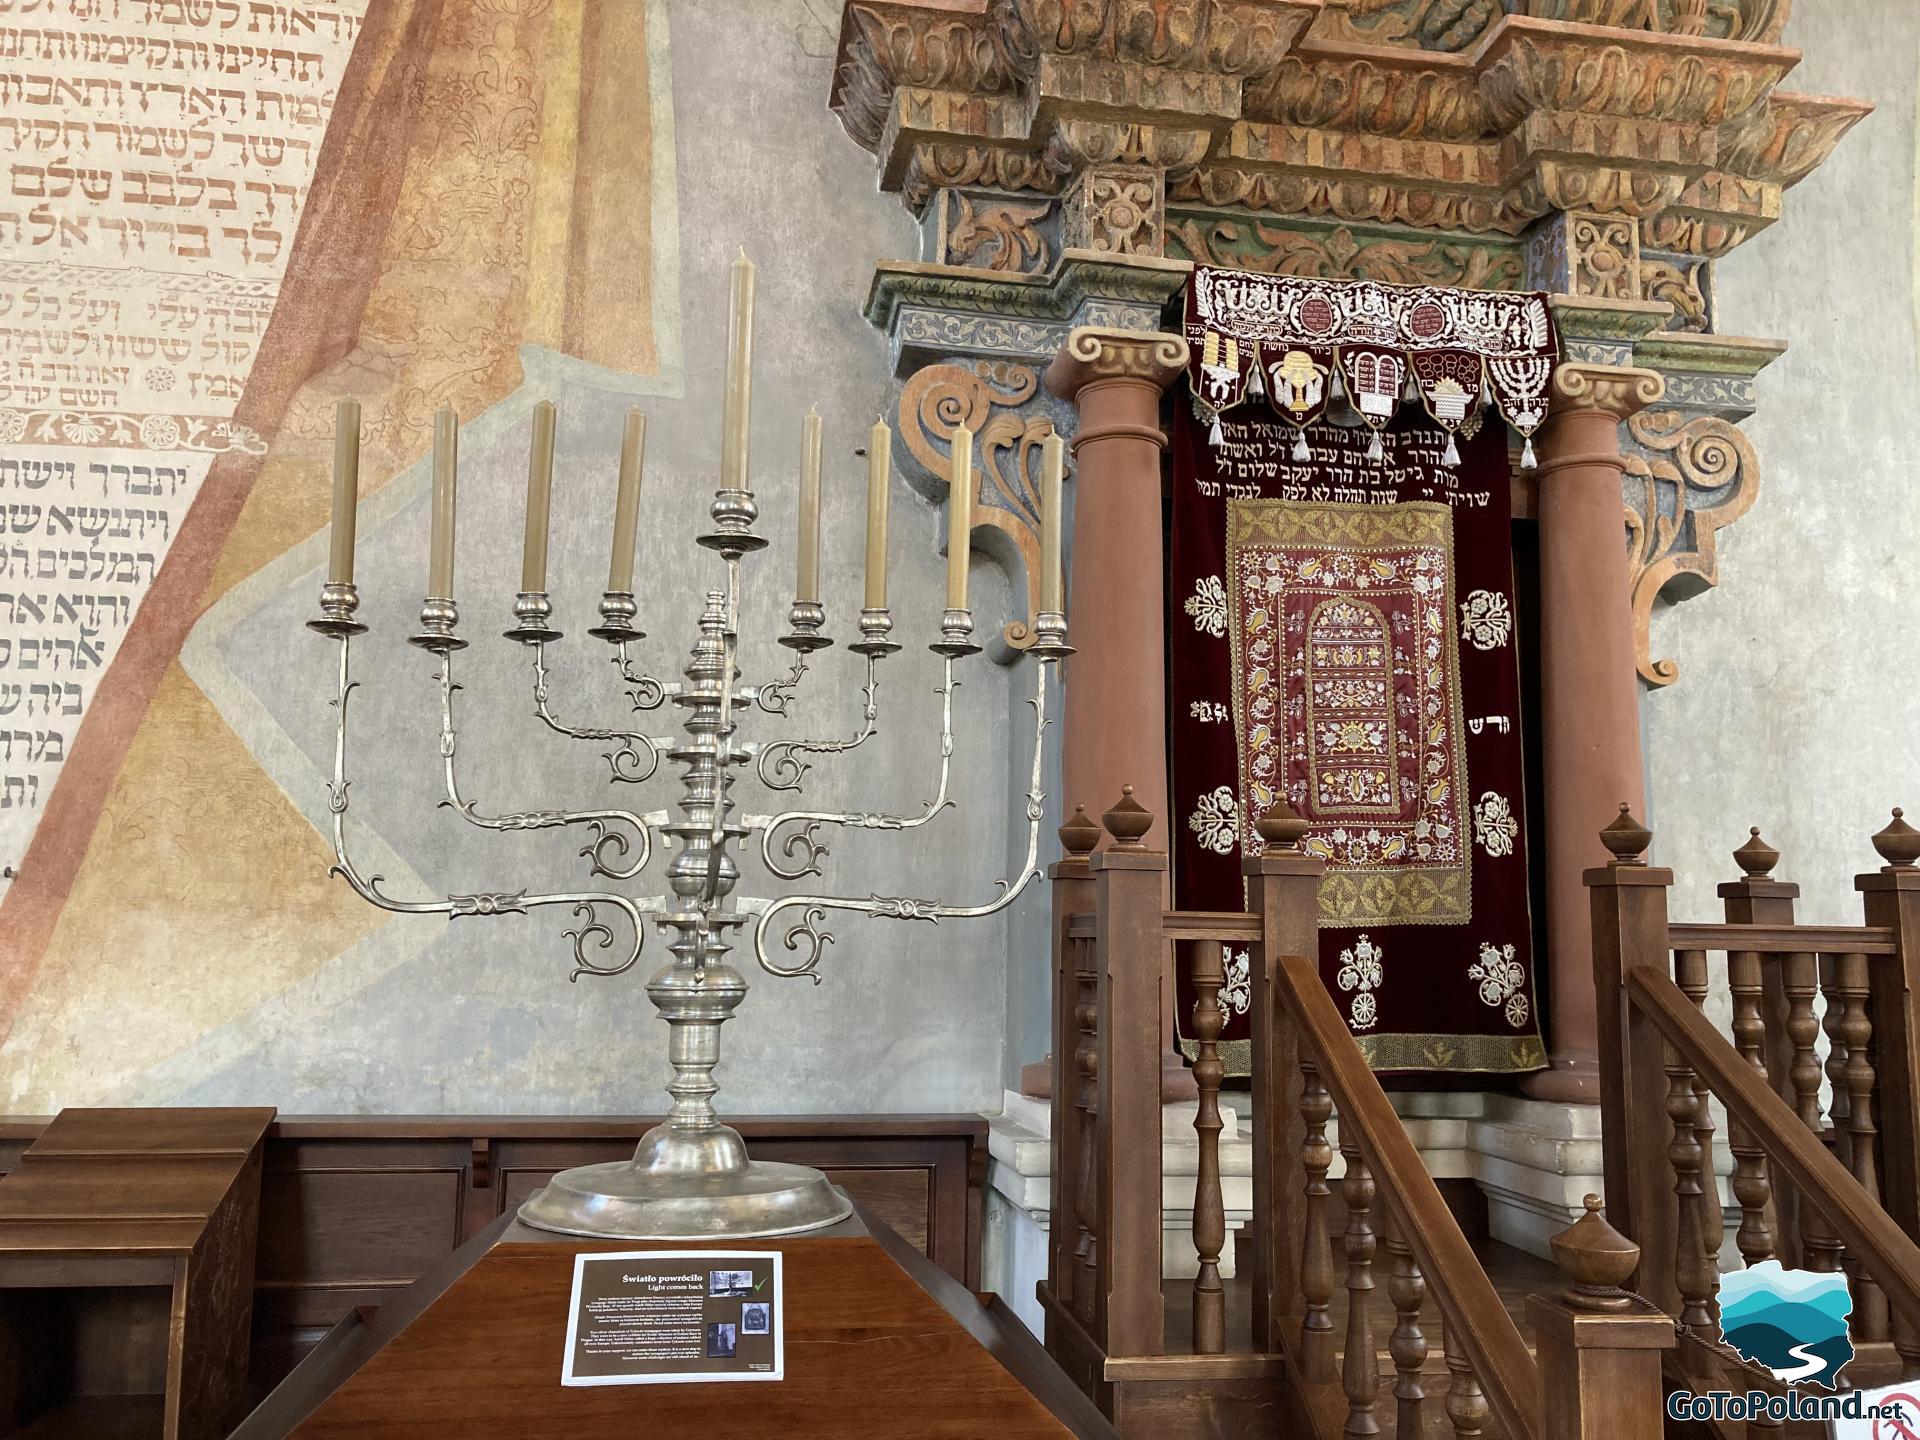 aron ha-kodesh in the synagogue, and in the foreground a Hanukkah candlestick with 9 cream candles